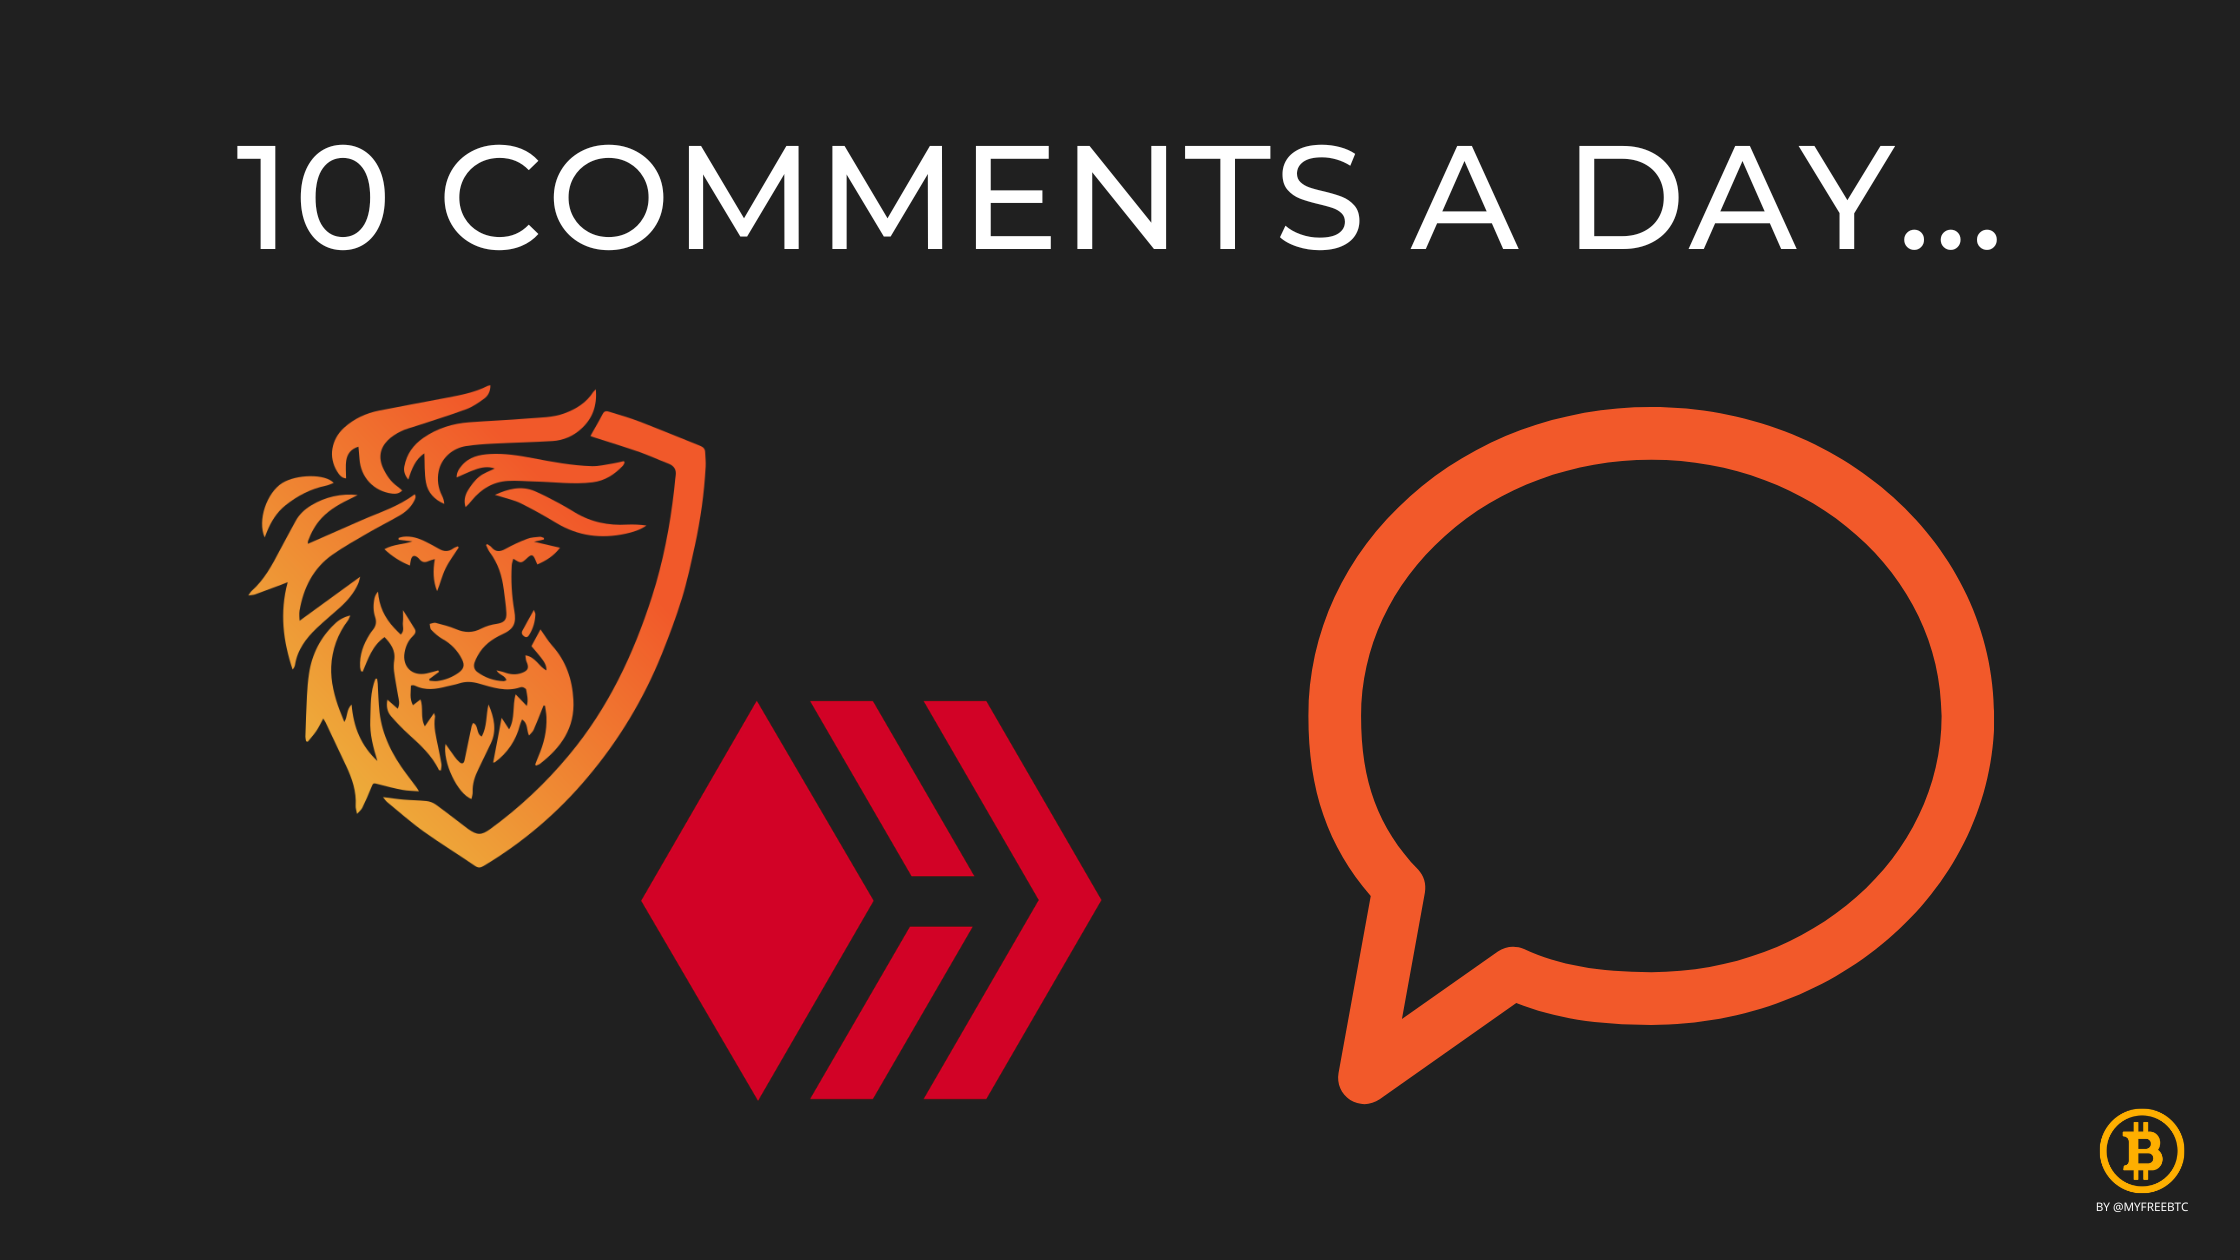 @myfreebtc/10-comments-a-day-keeps-engagement-underway